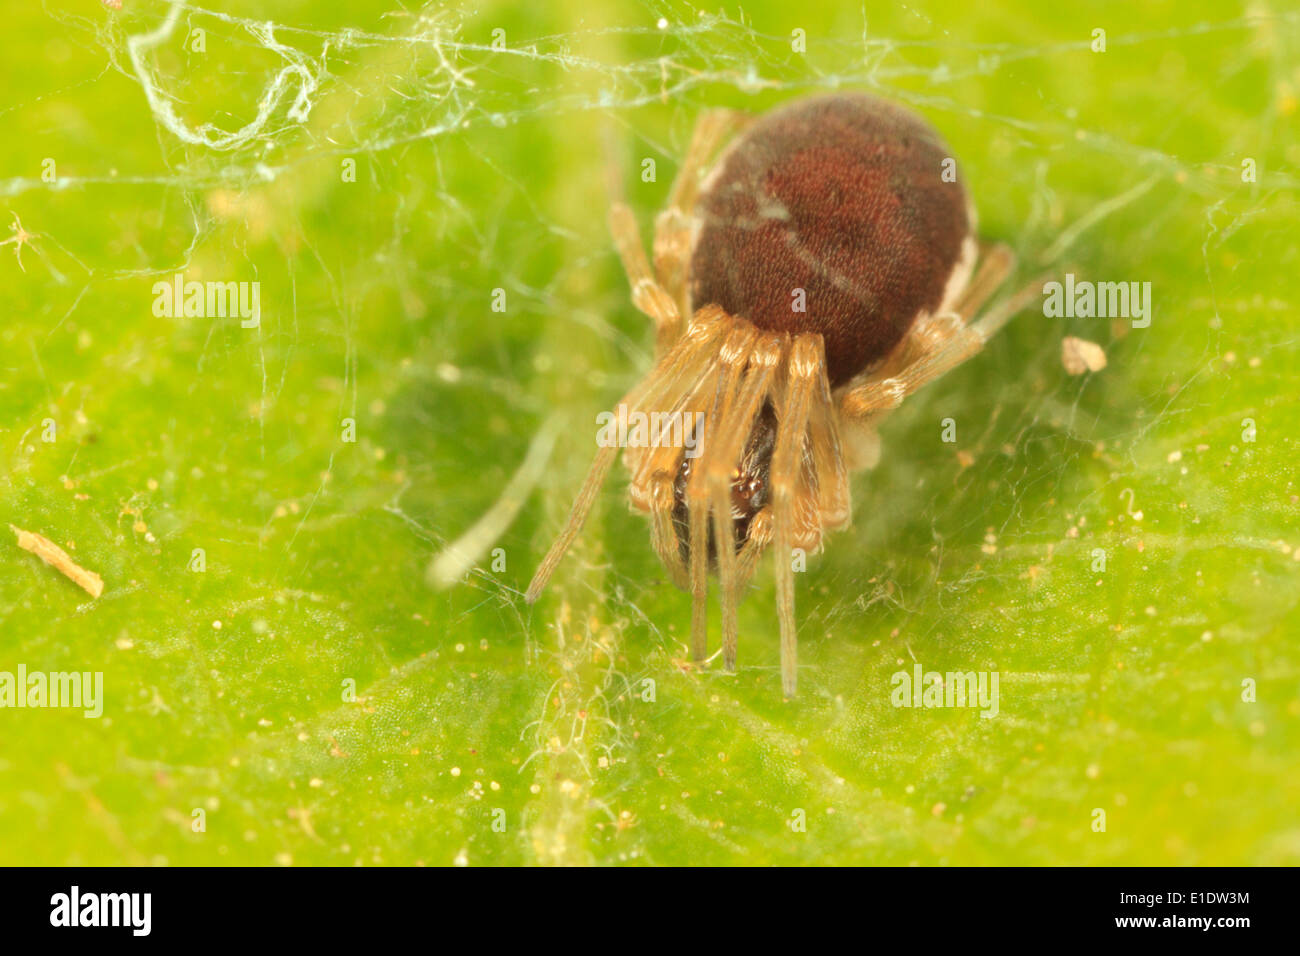 Spider on a leaf in its web (Dictynidae sp.) Stock Photo